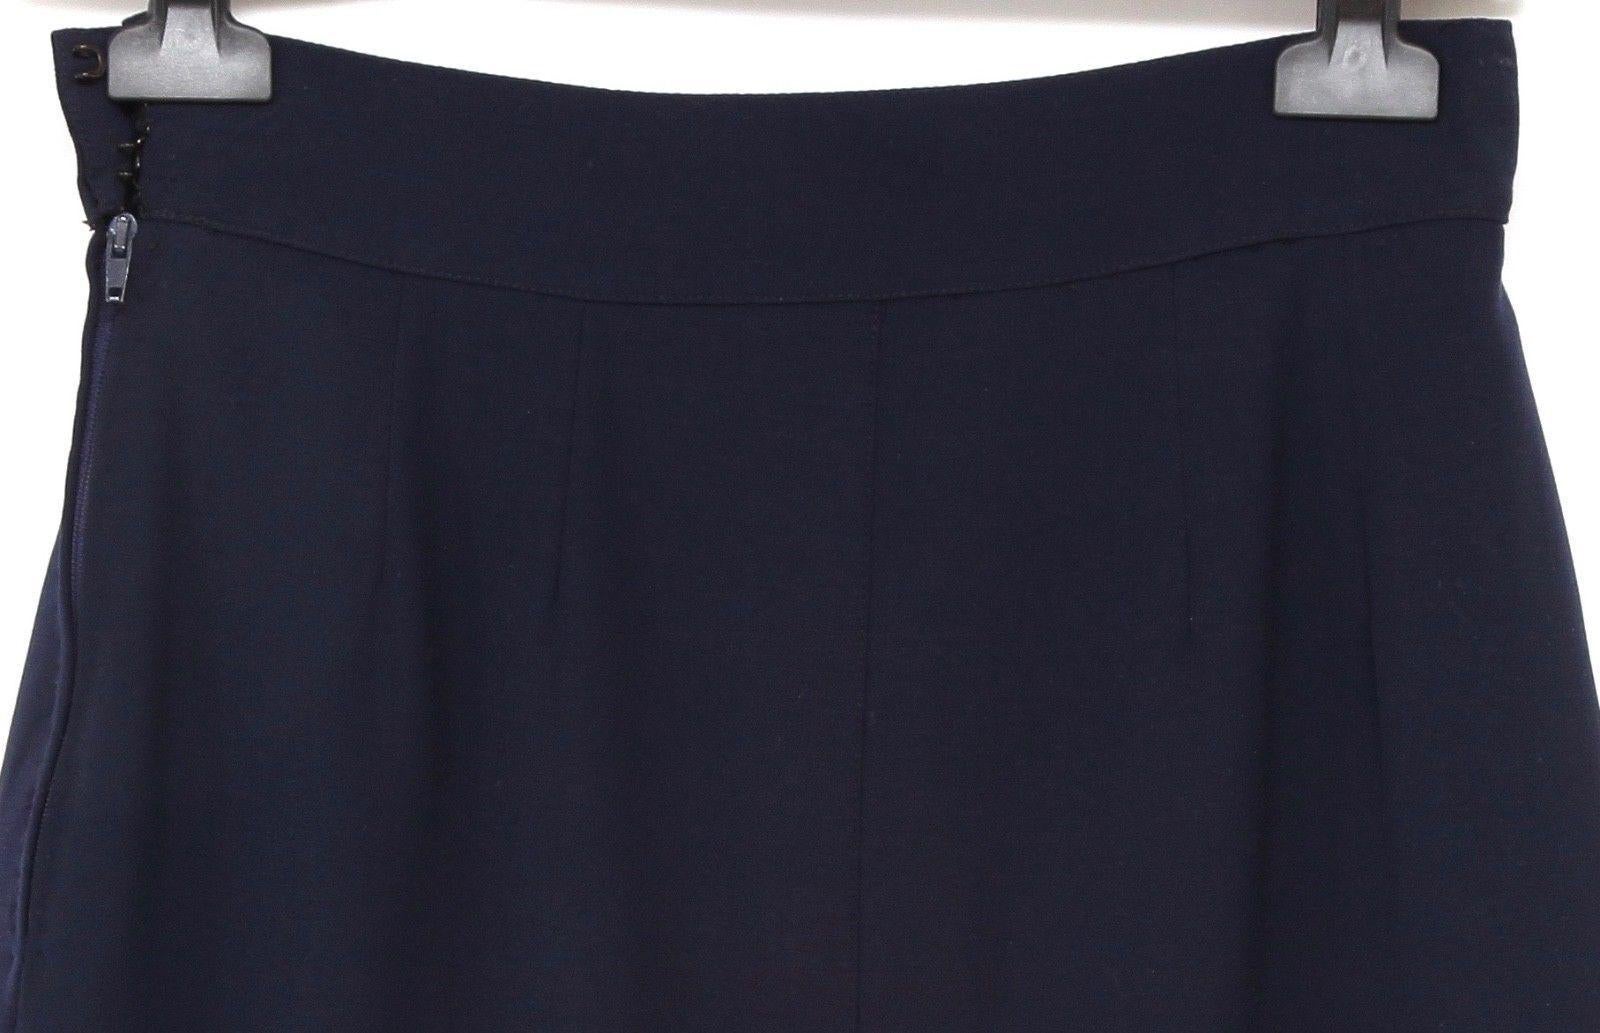 HERMES Skirt Navy Blue Wool Straight Cut Classic Zipper Sz 40 VINTAGE In Fair Condition For Sale In Hollywood, FL